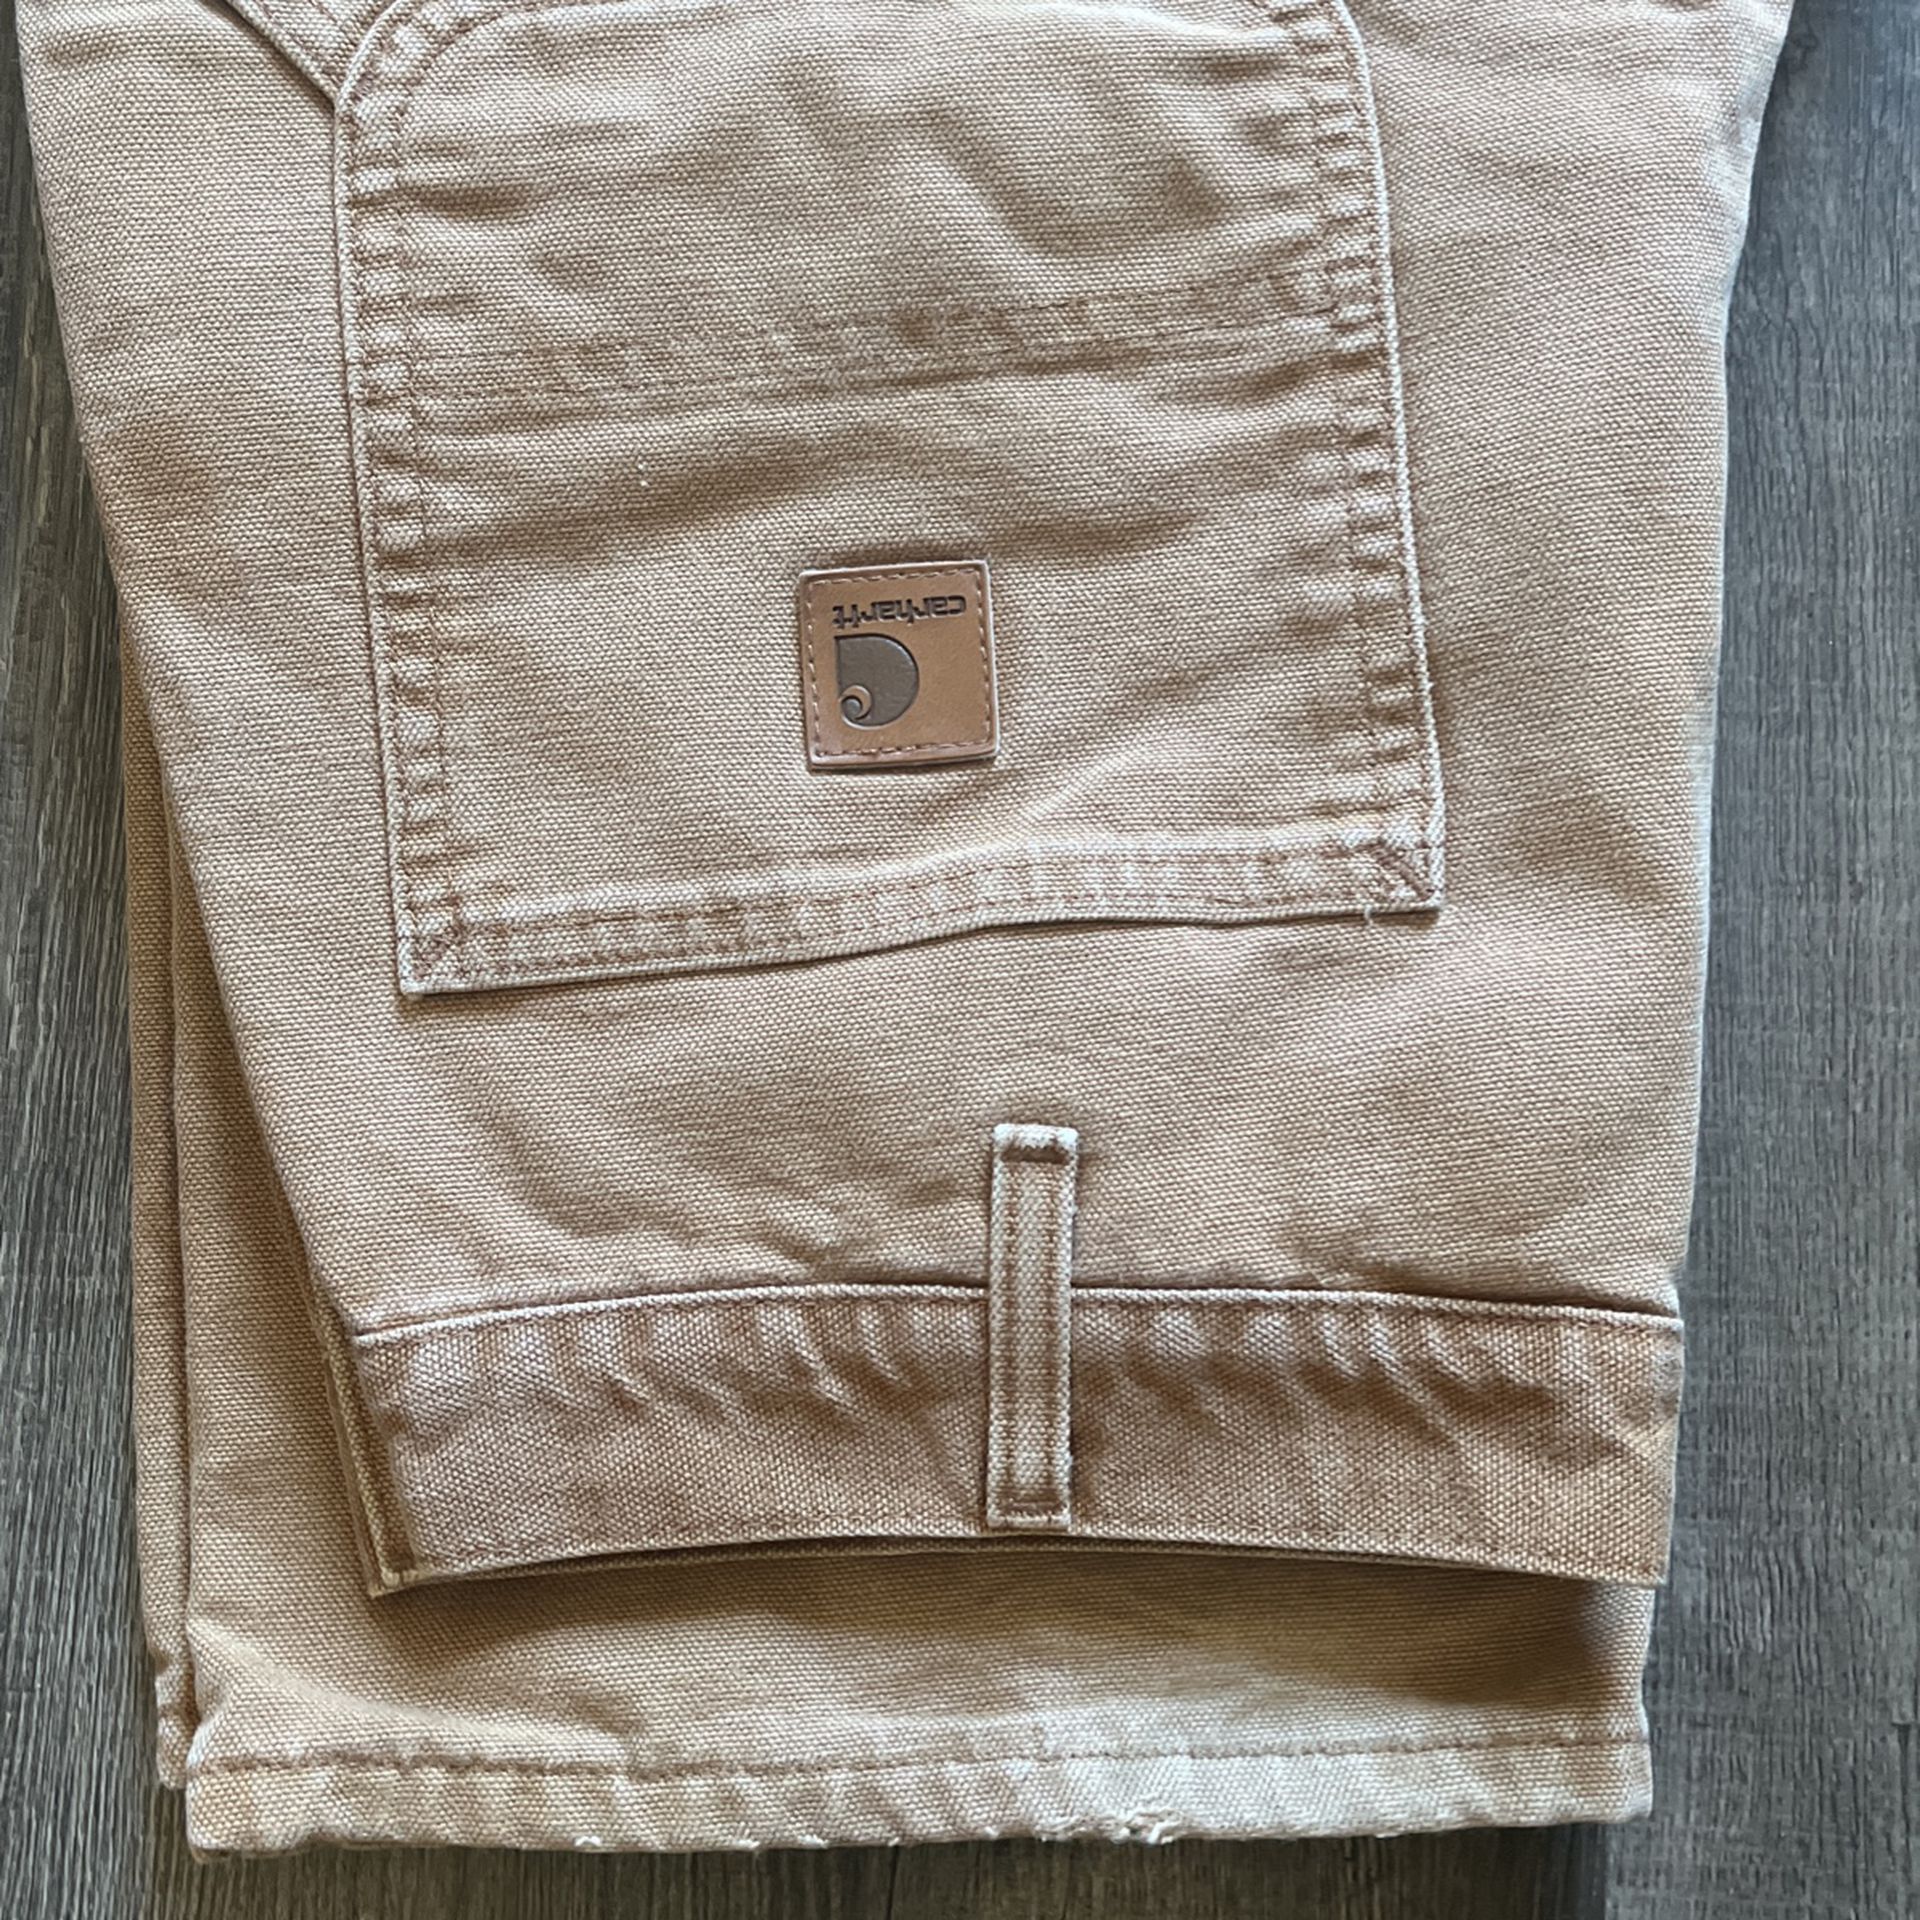 Carhartt Lined Pants 34x32 for Sale in Madison, ME - OfferUp